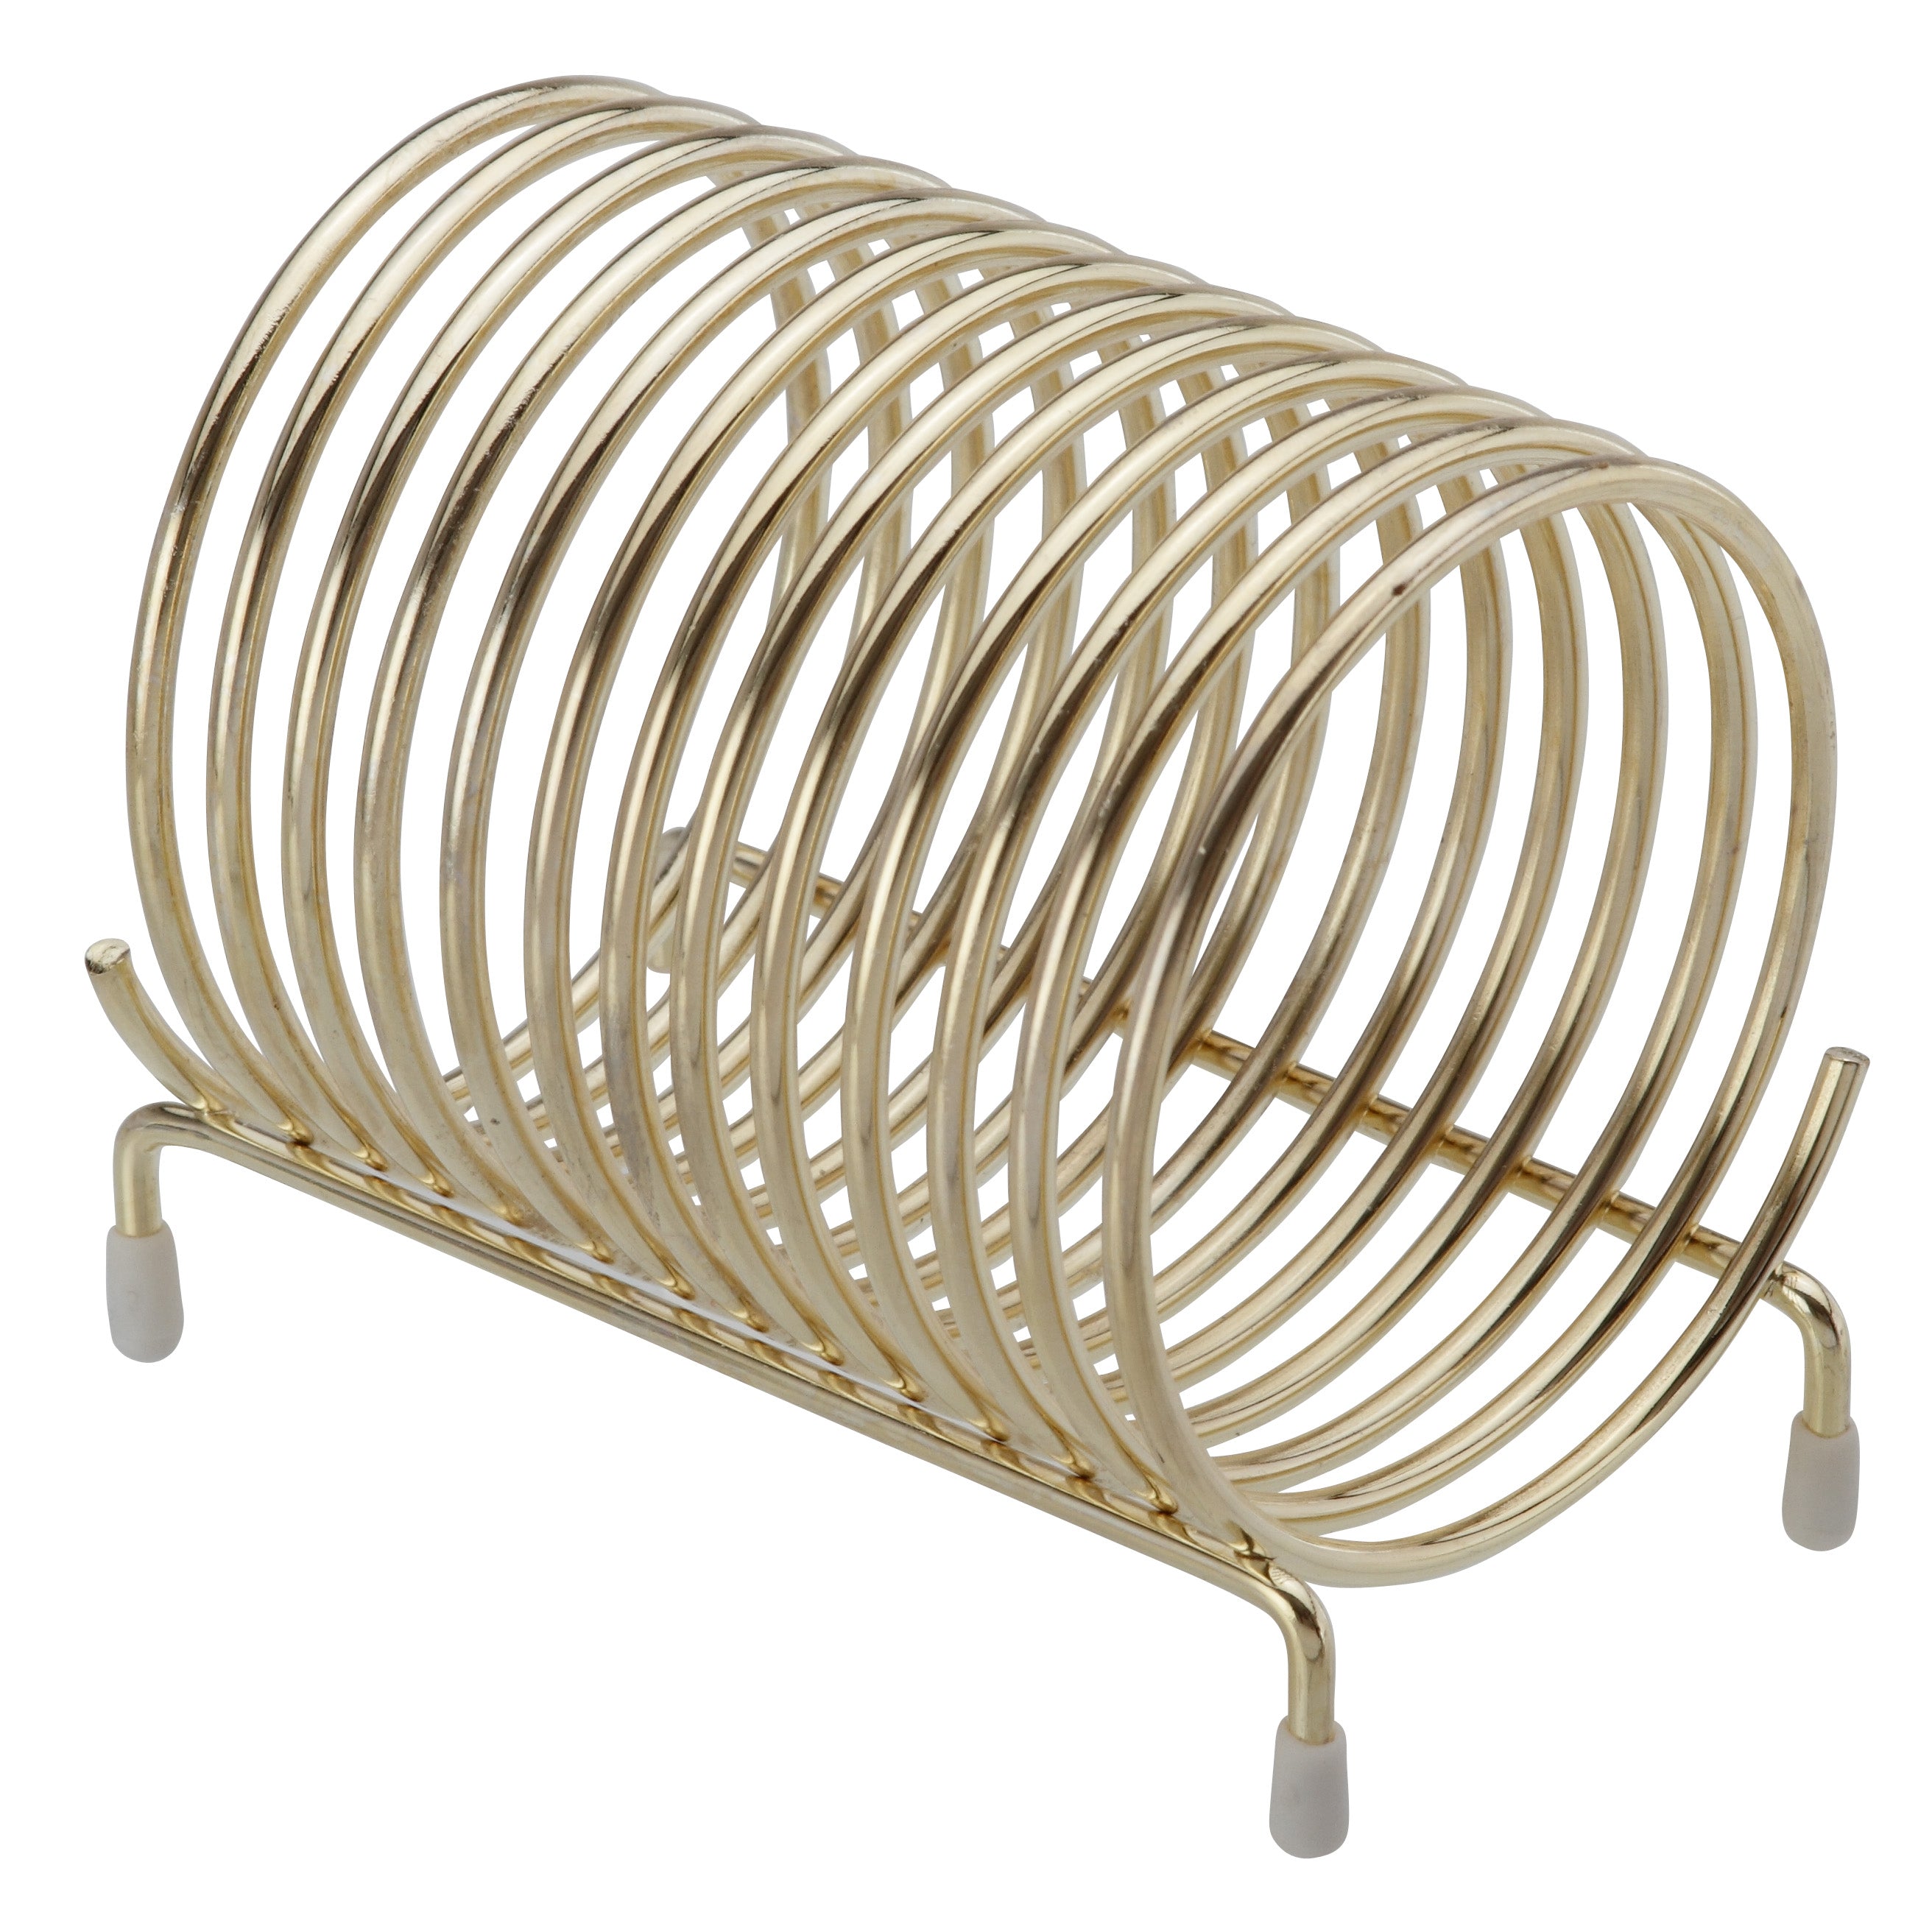 Royal Industries (ROY CC 43 B) Brass Plated Check Caddy Coil Shape with Plastic Feet